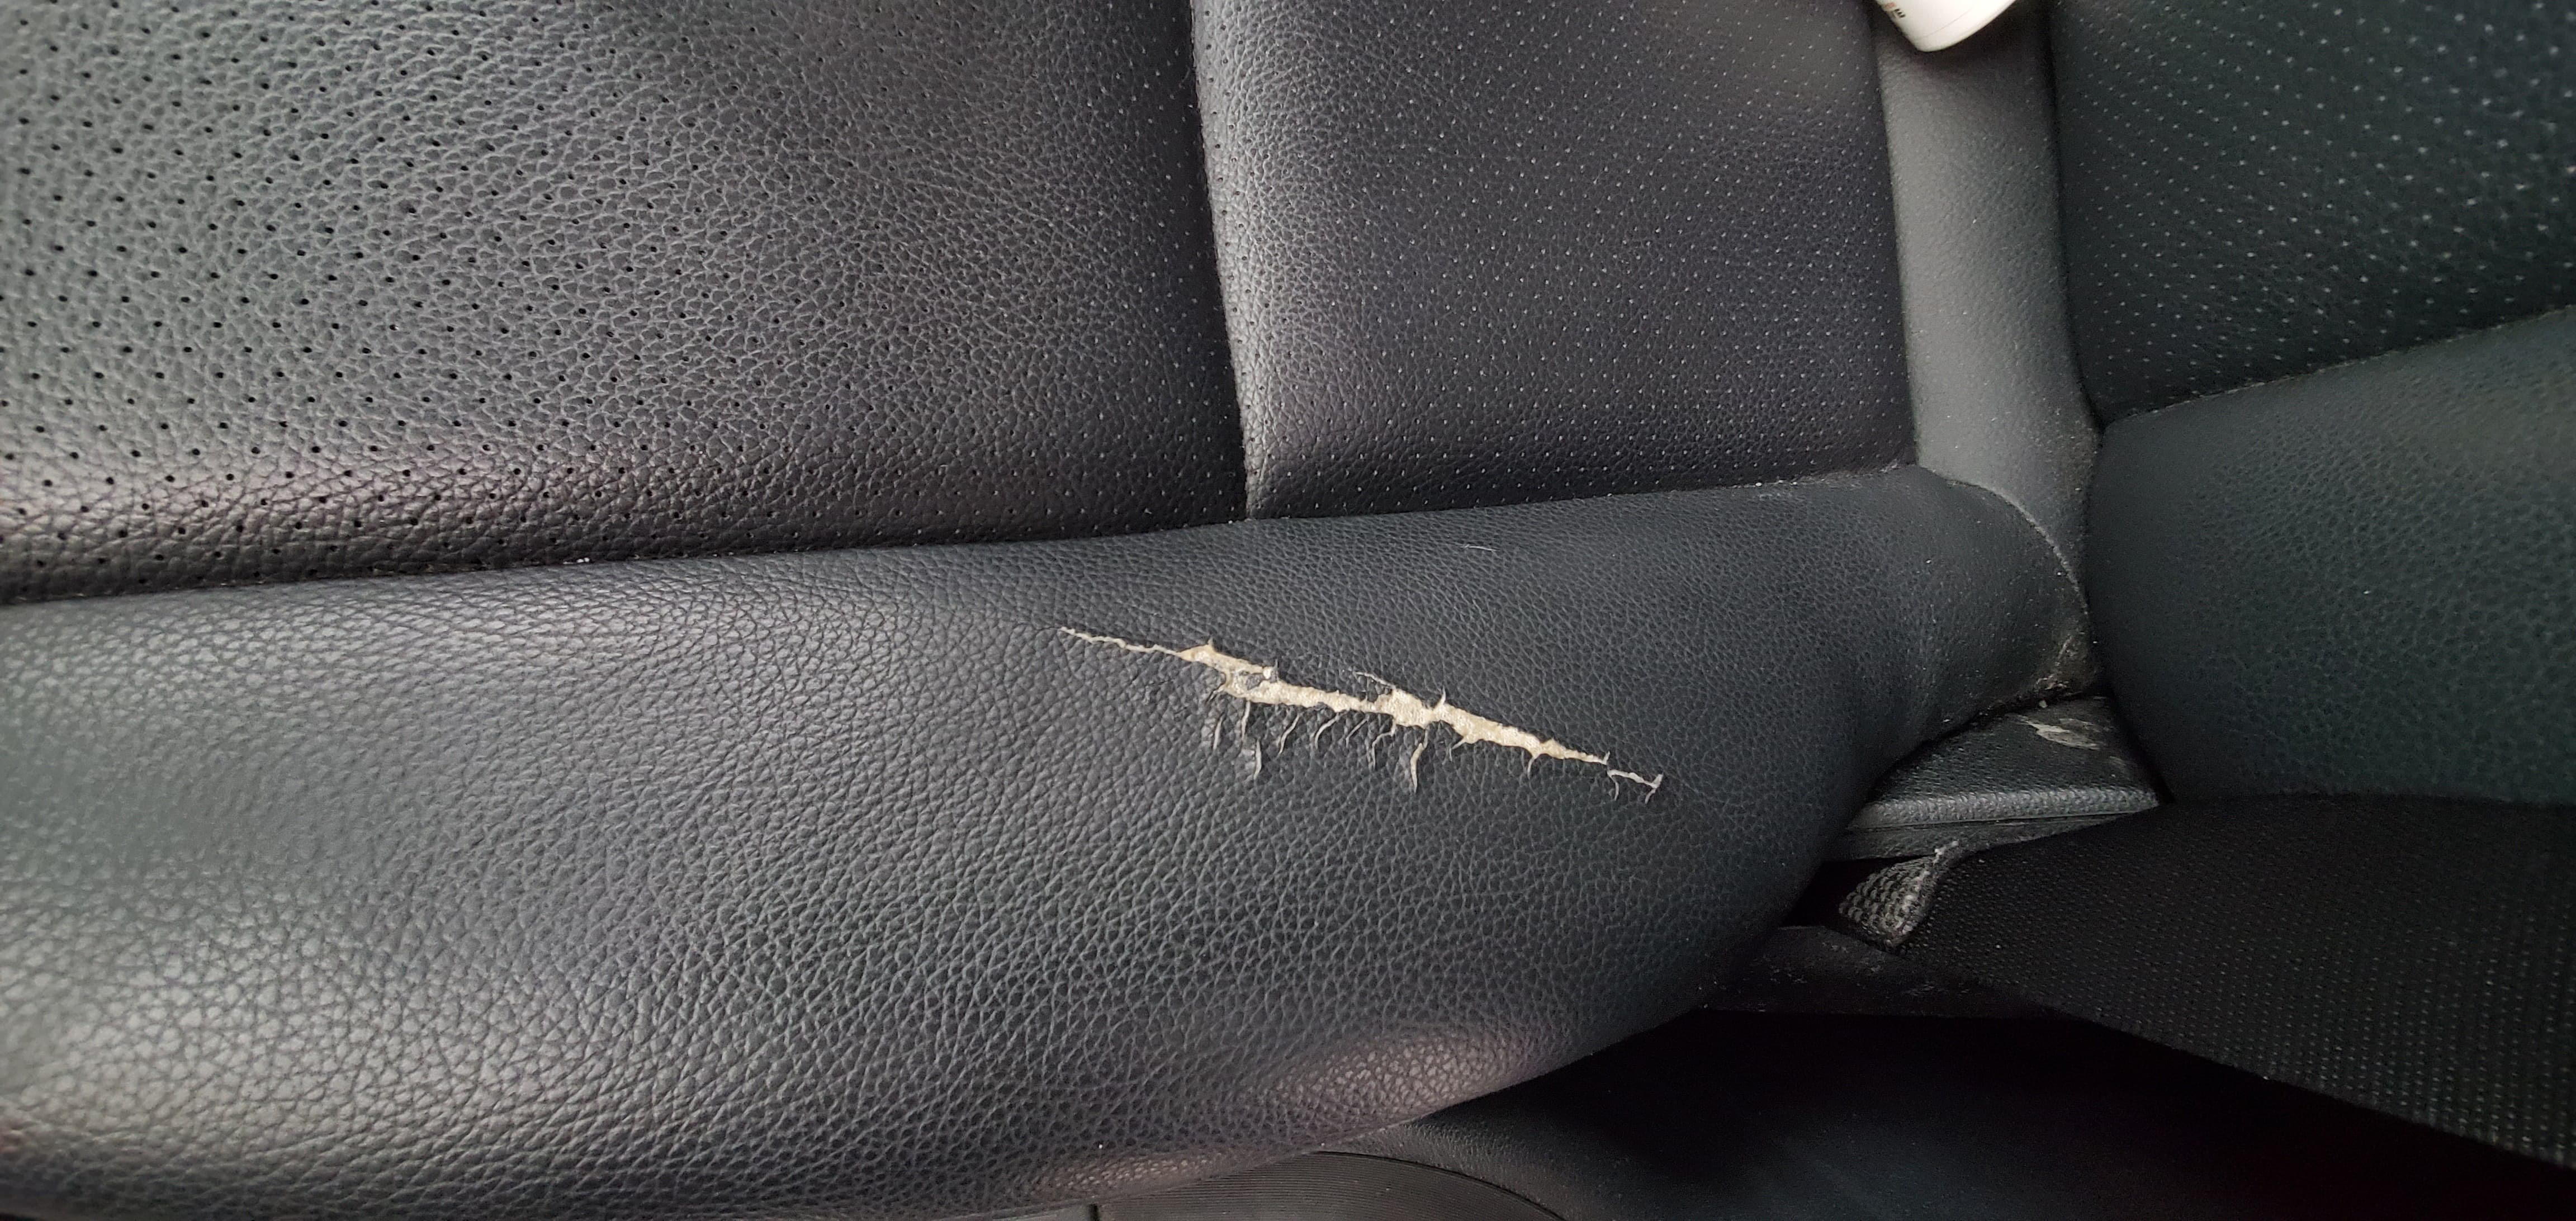 Cracked Leather on Car Seat